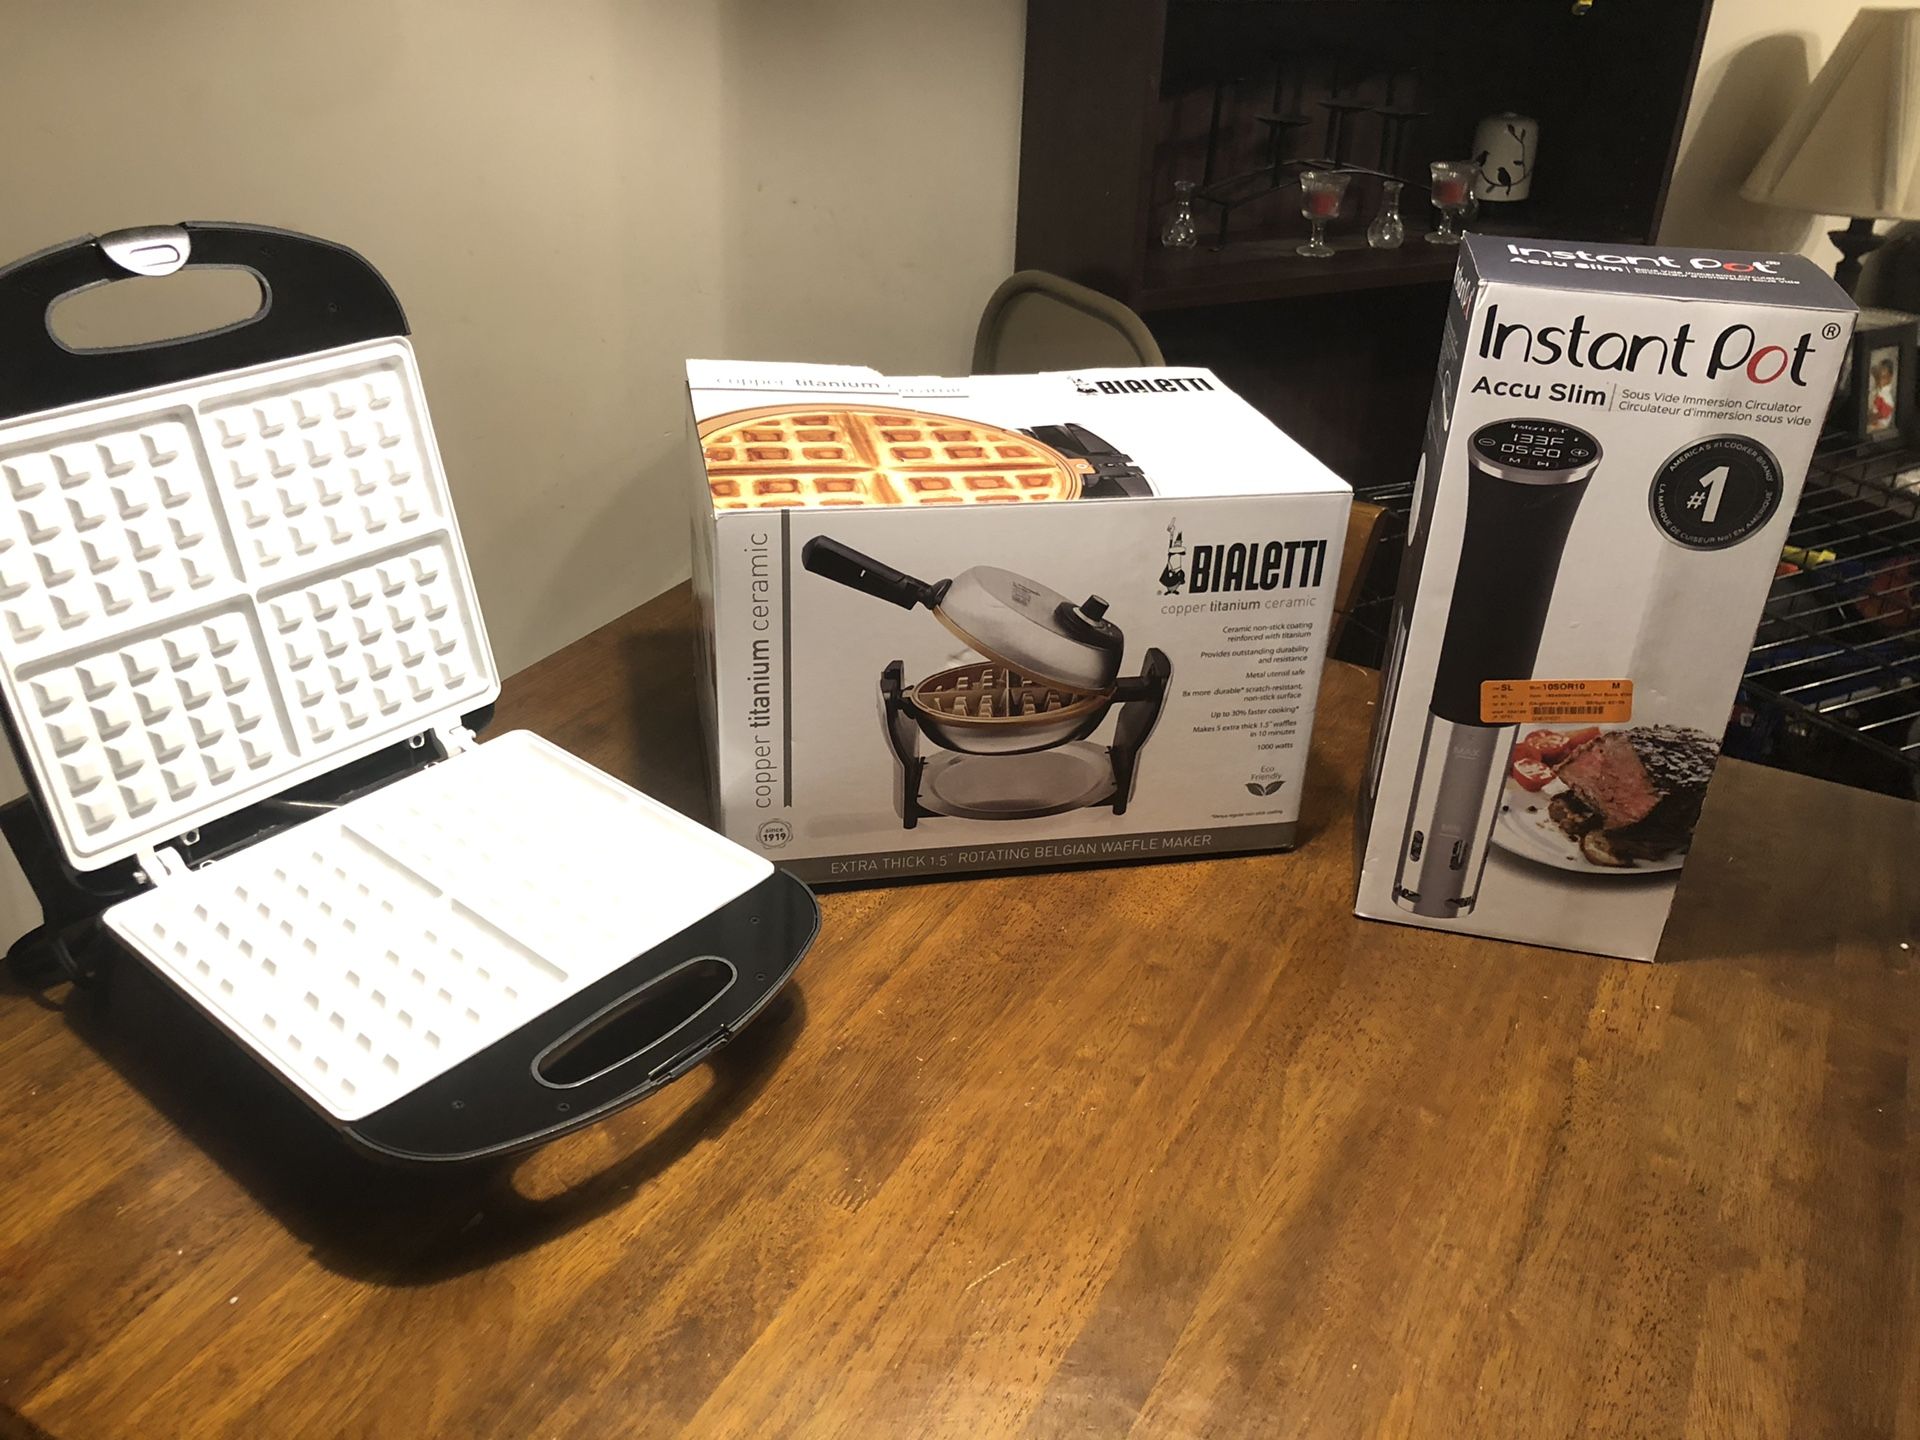 Waffle makers and instant pot